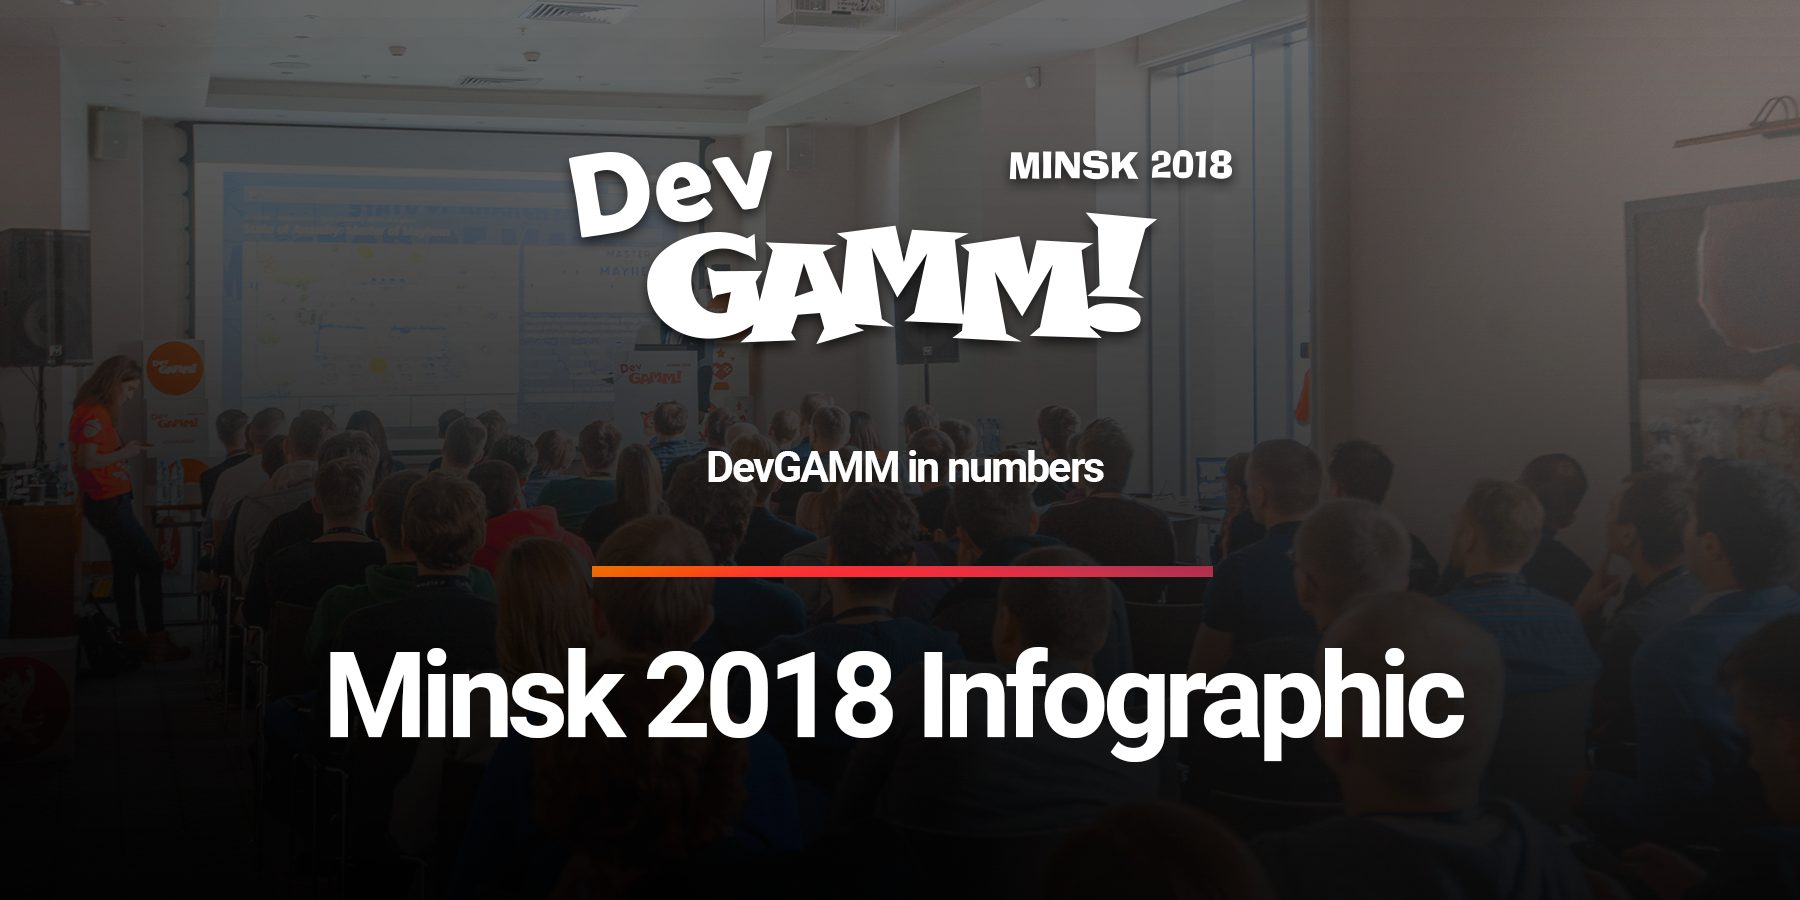 You are currently viewing Инфографика DevGAMM Minsk 2018